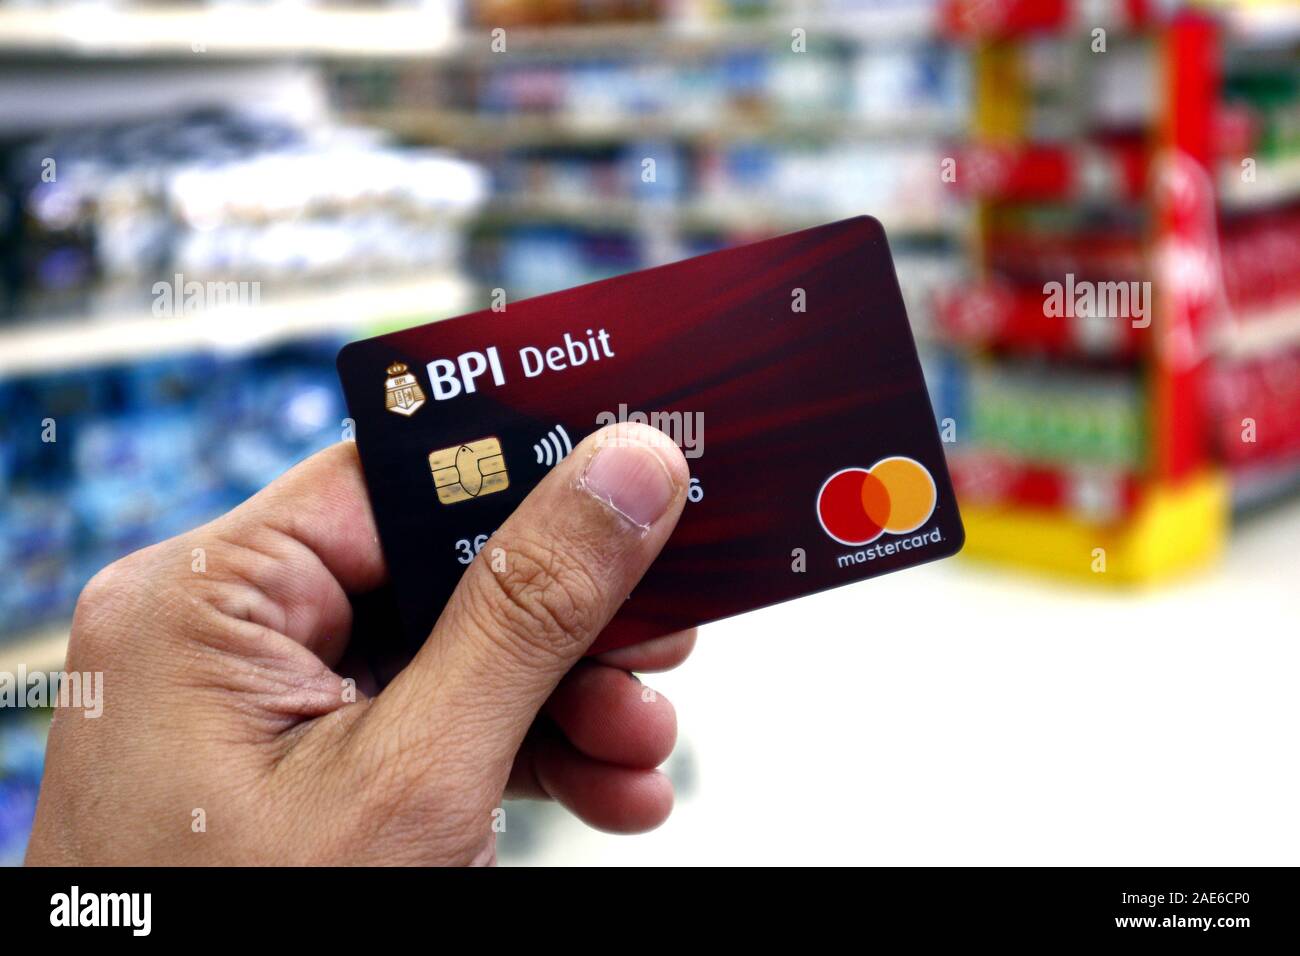 Antipolo City Philippines December 4 2019 Hand Holding A Bank Debit And Atm Card While Inside A Supermarket Stock Photo Alamy